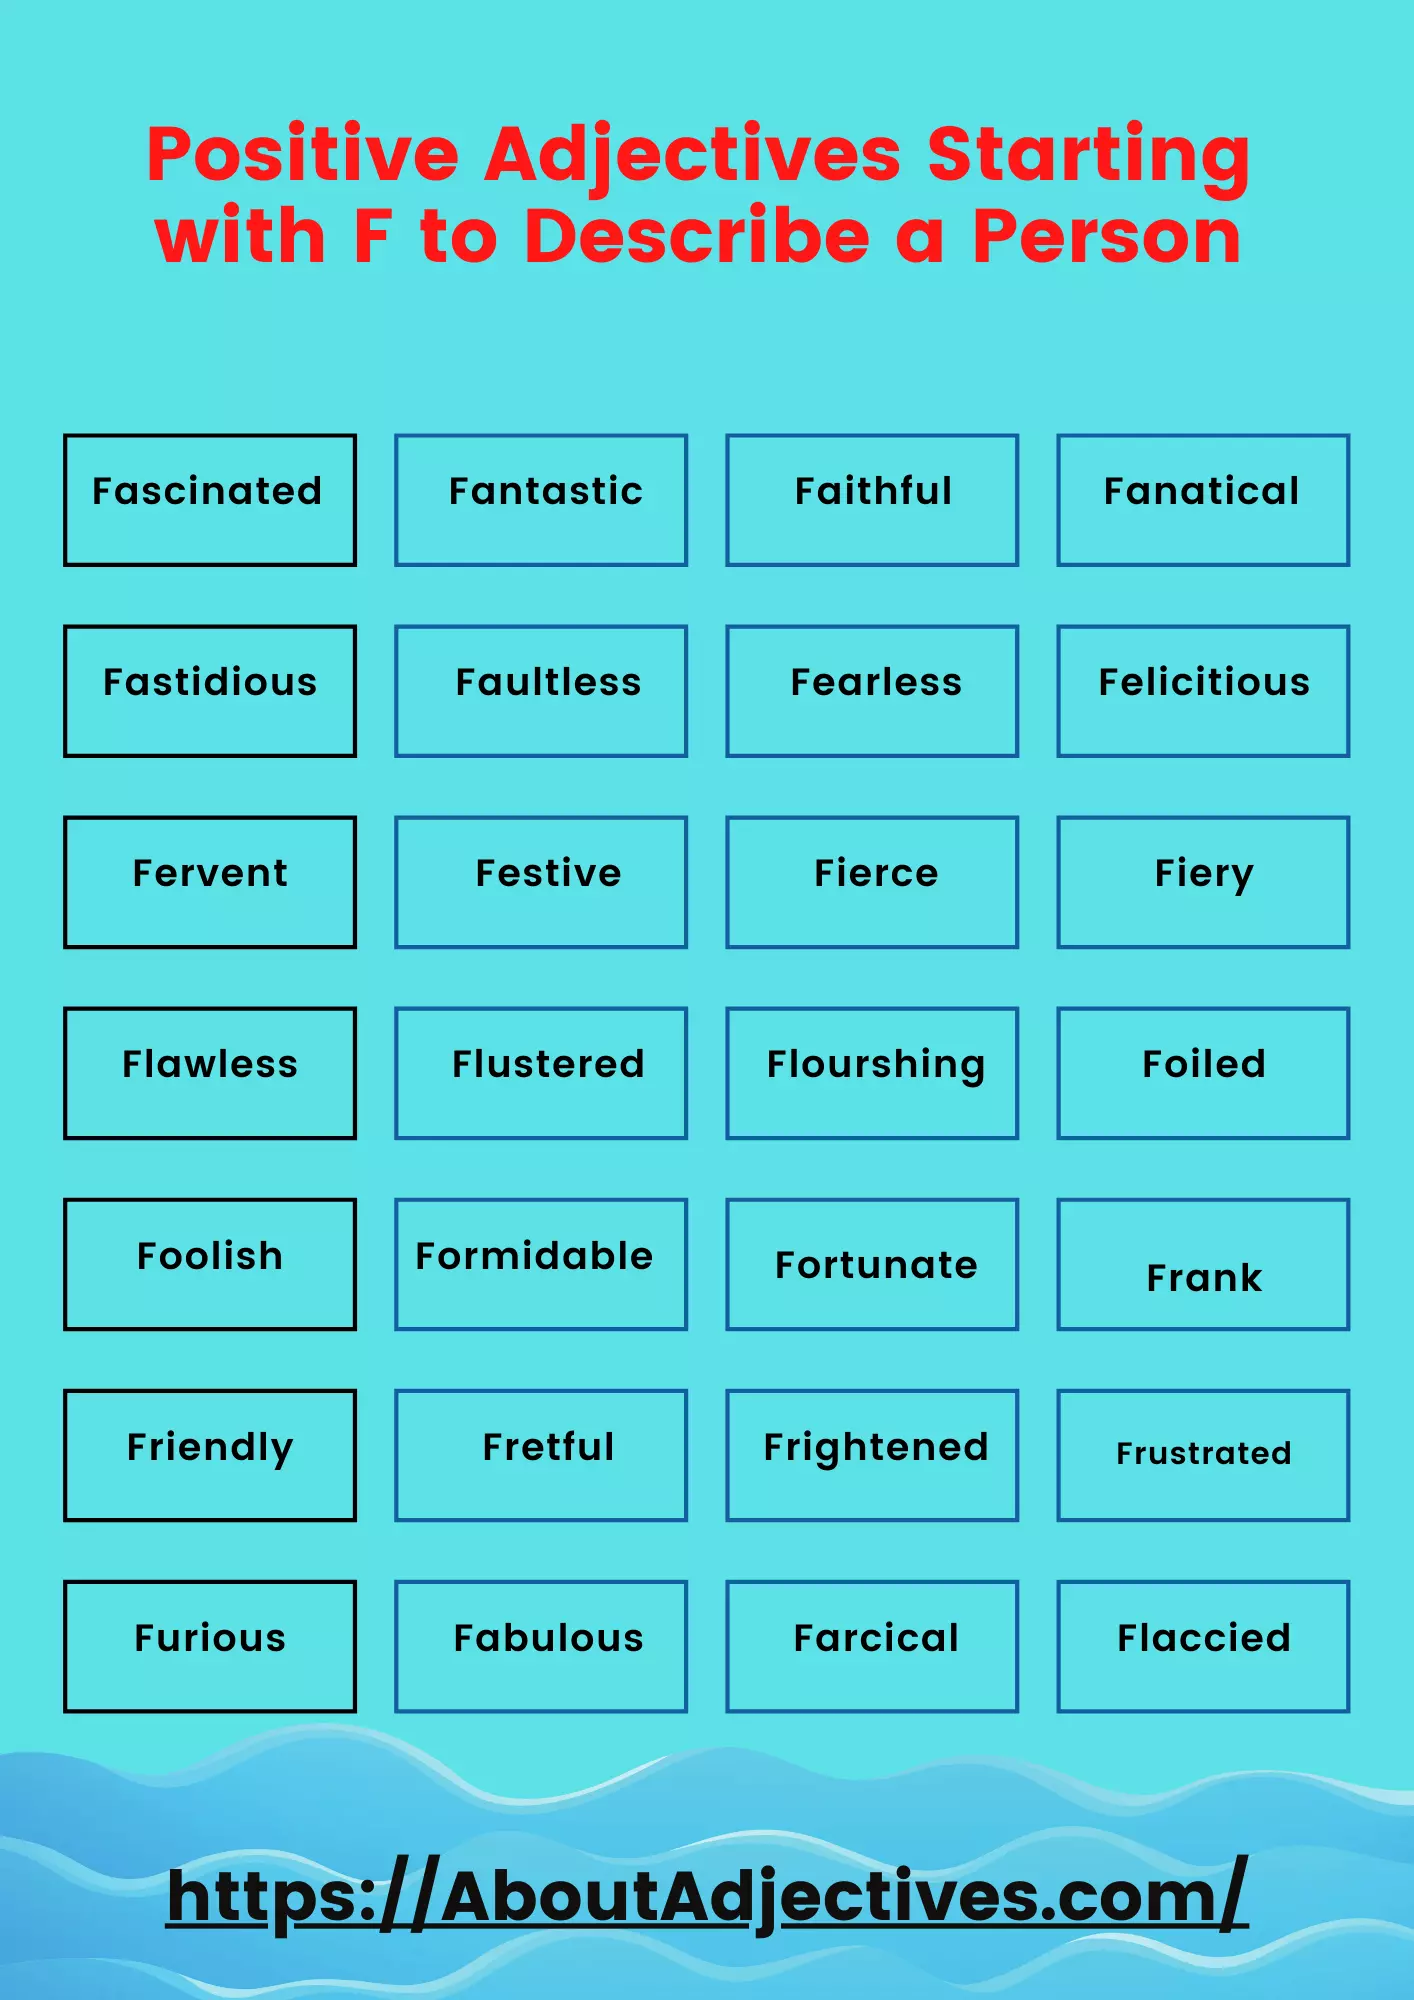 Adjectives that Start with F to describe a person